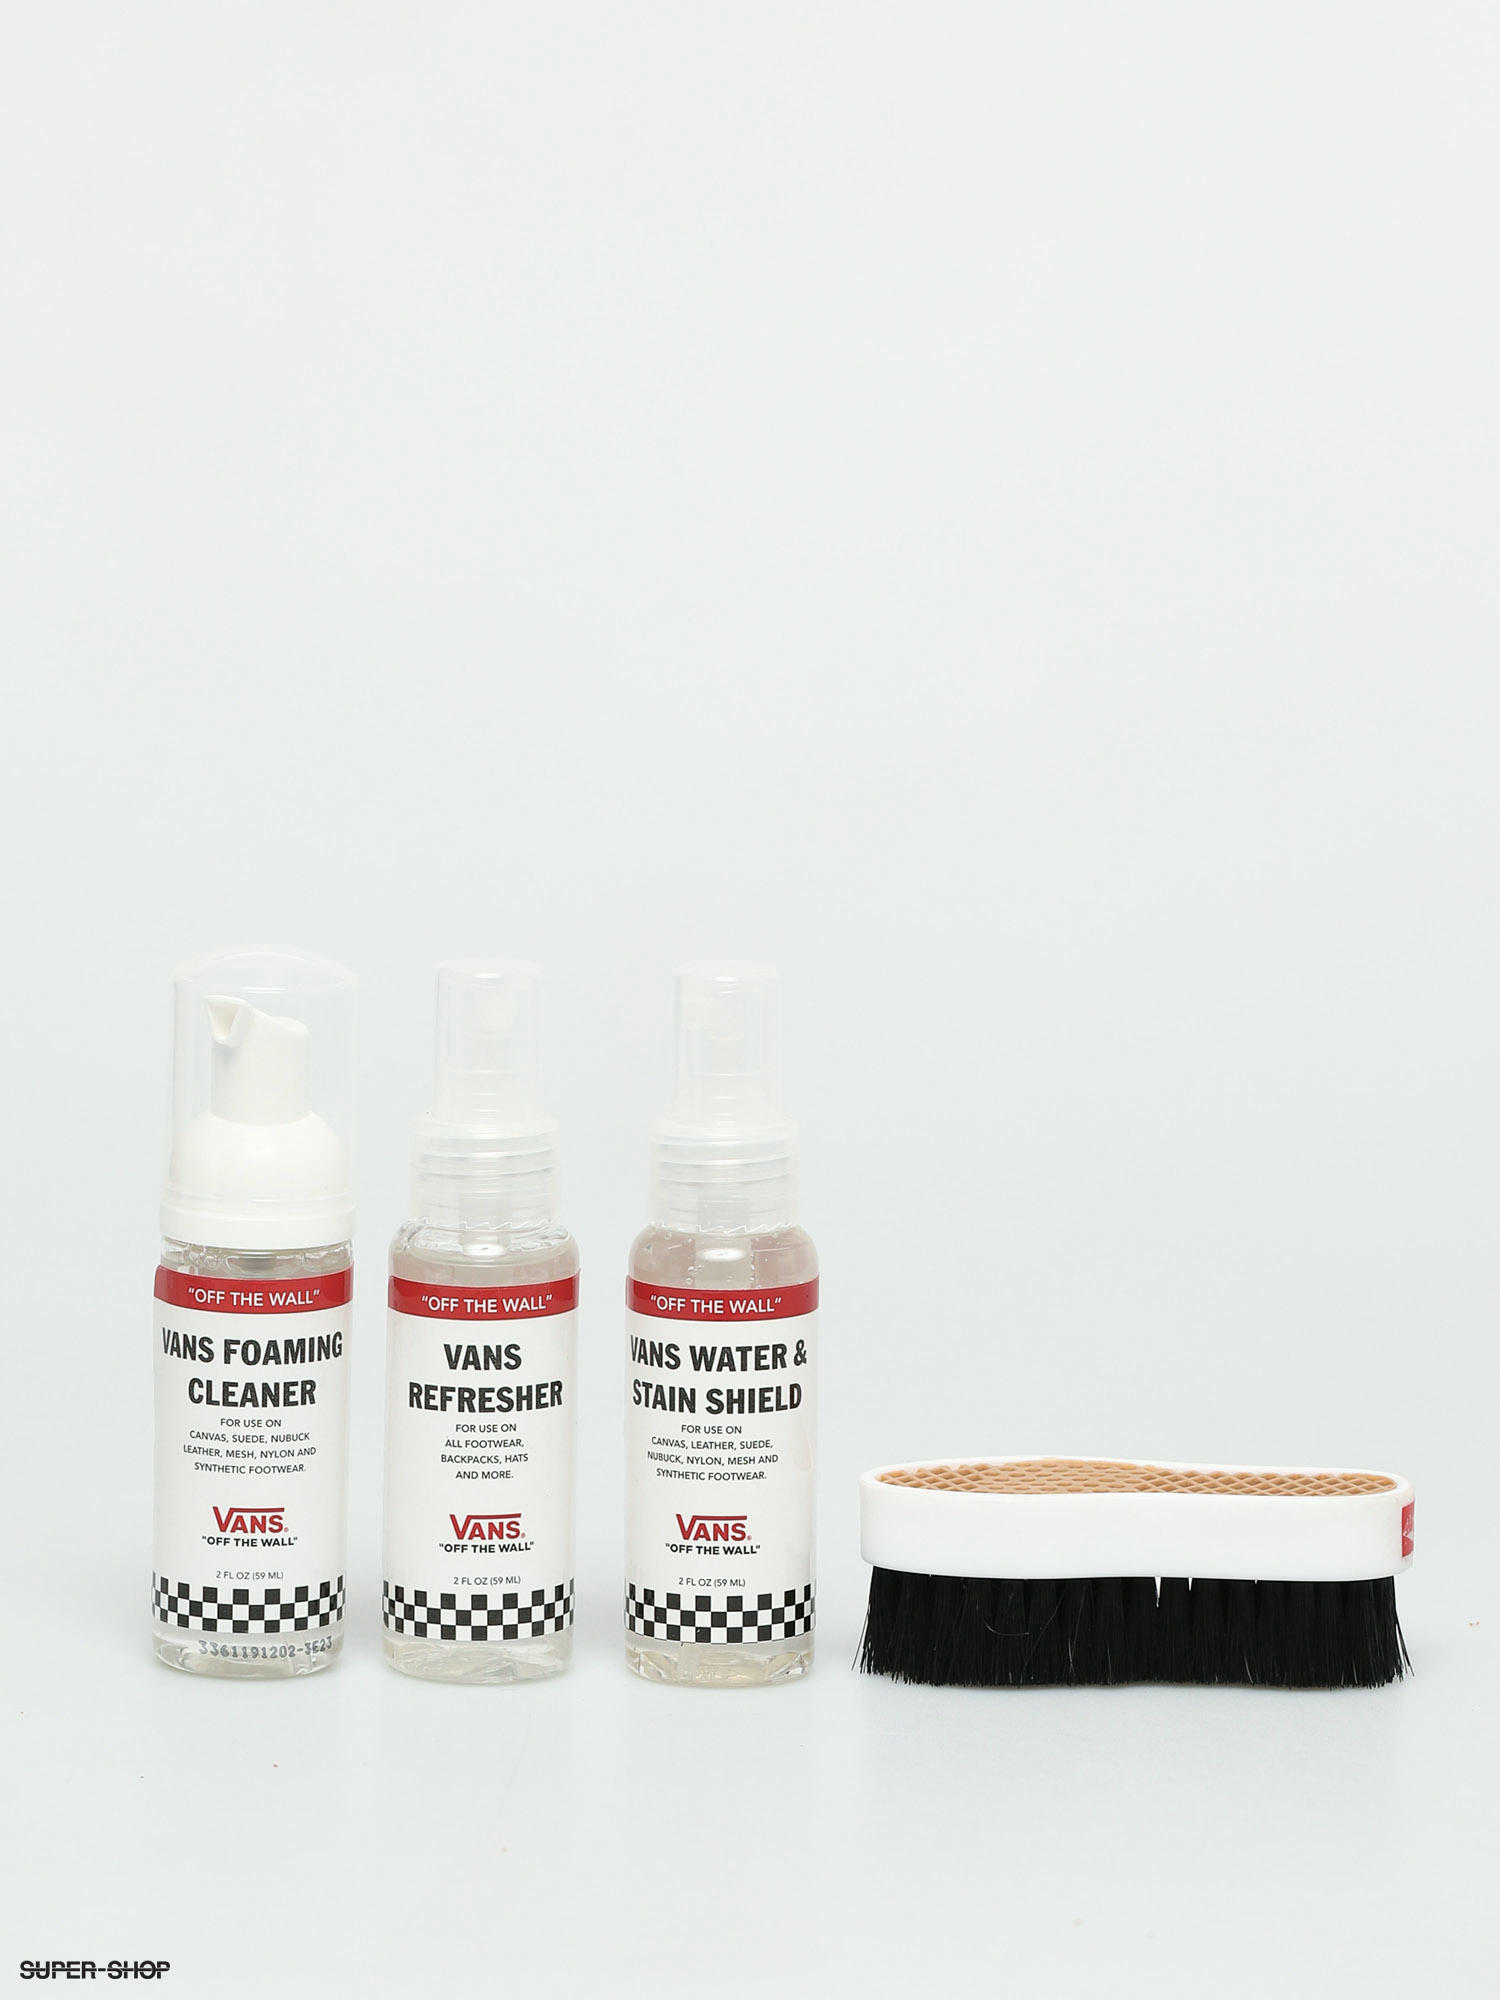 how to use vans shoe care kit